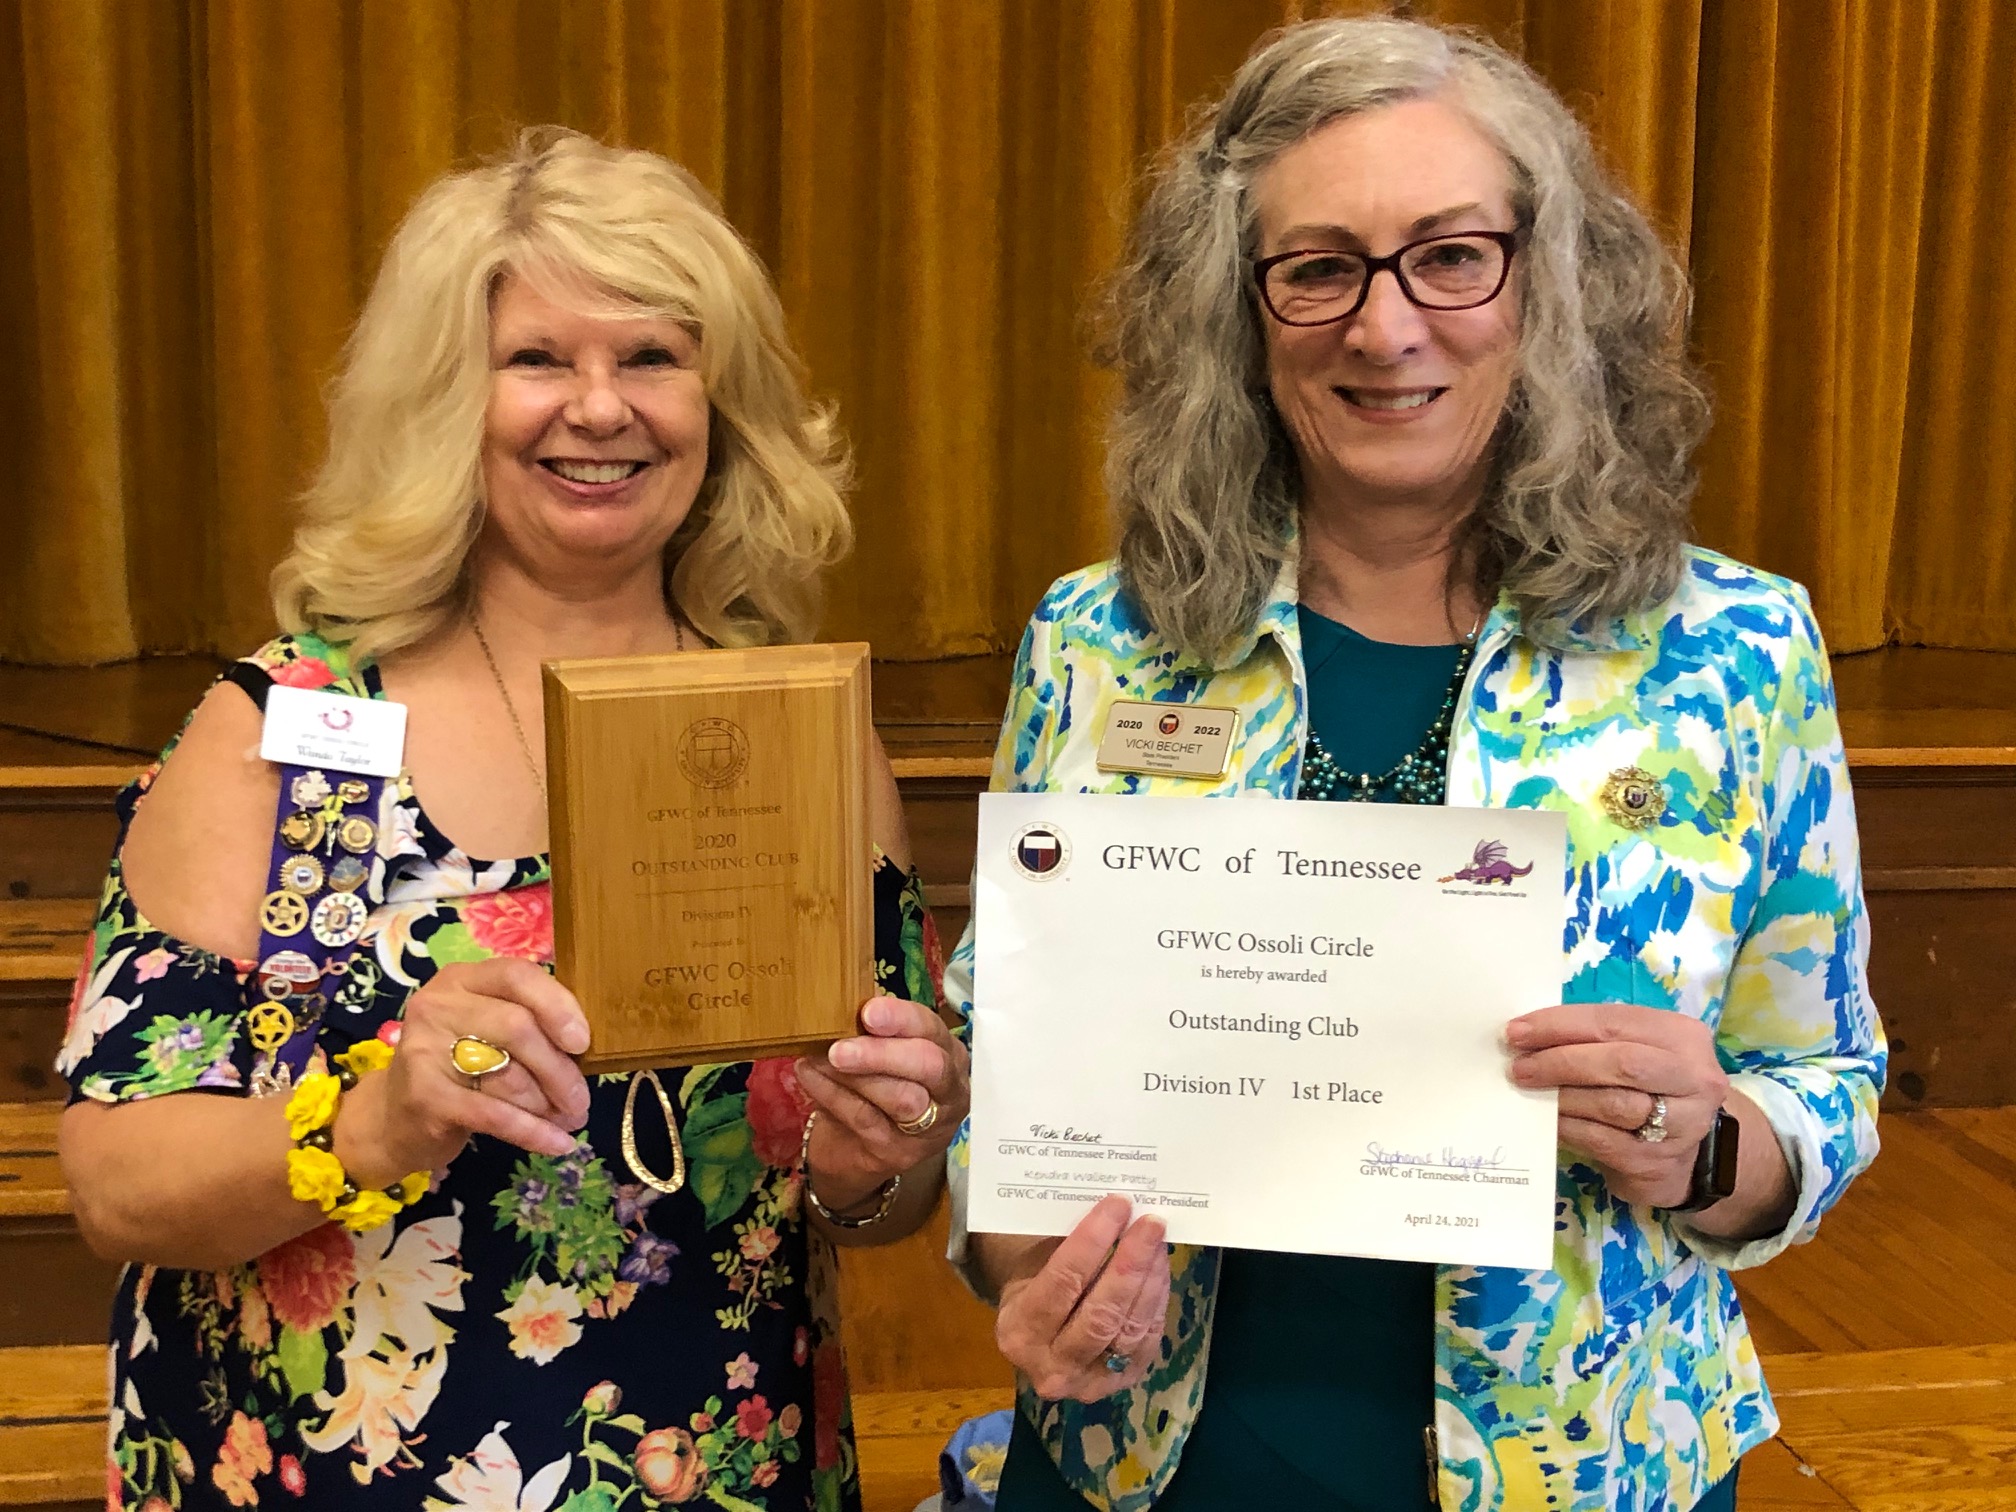 Read more about the article GFWC Ossoli Circle honored as Outstanding Club in Division IV at GFWC of Tennessee Conference.